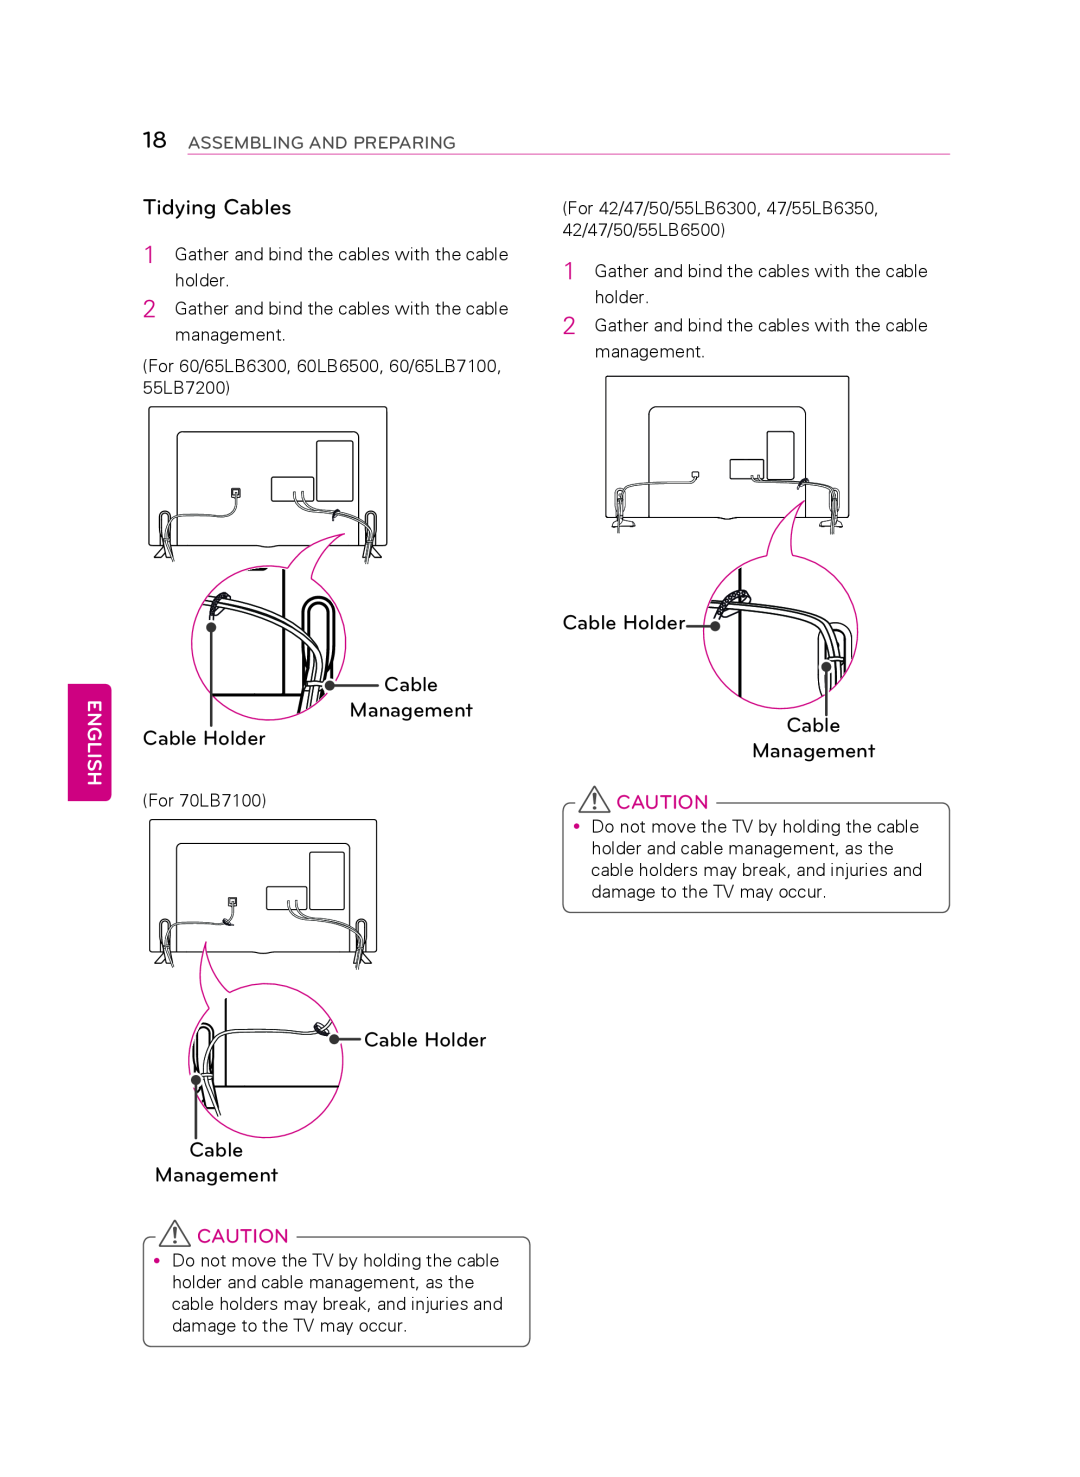 LG Electronics 50LB6300 owner manual Tidying Cables, English, Cable Management Cable Holder, Cable Holder Cable Management 